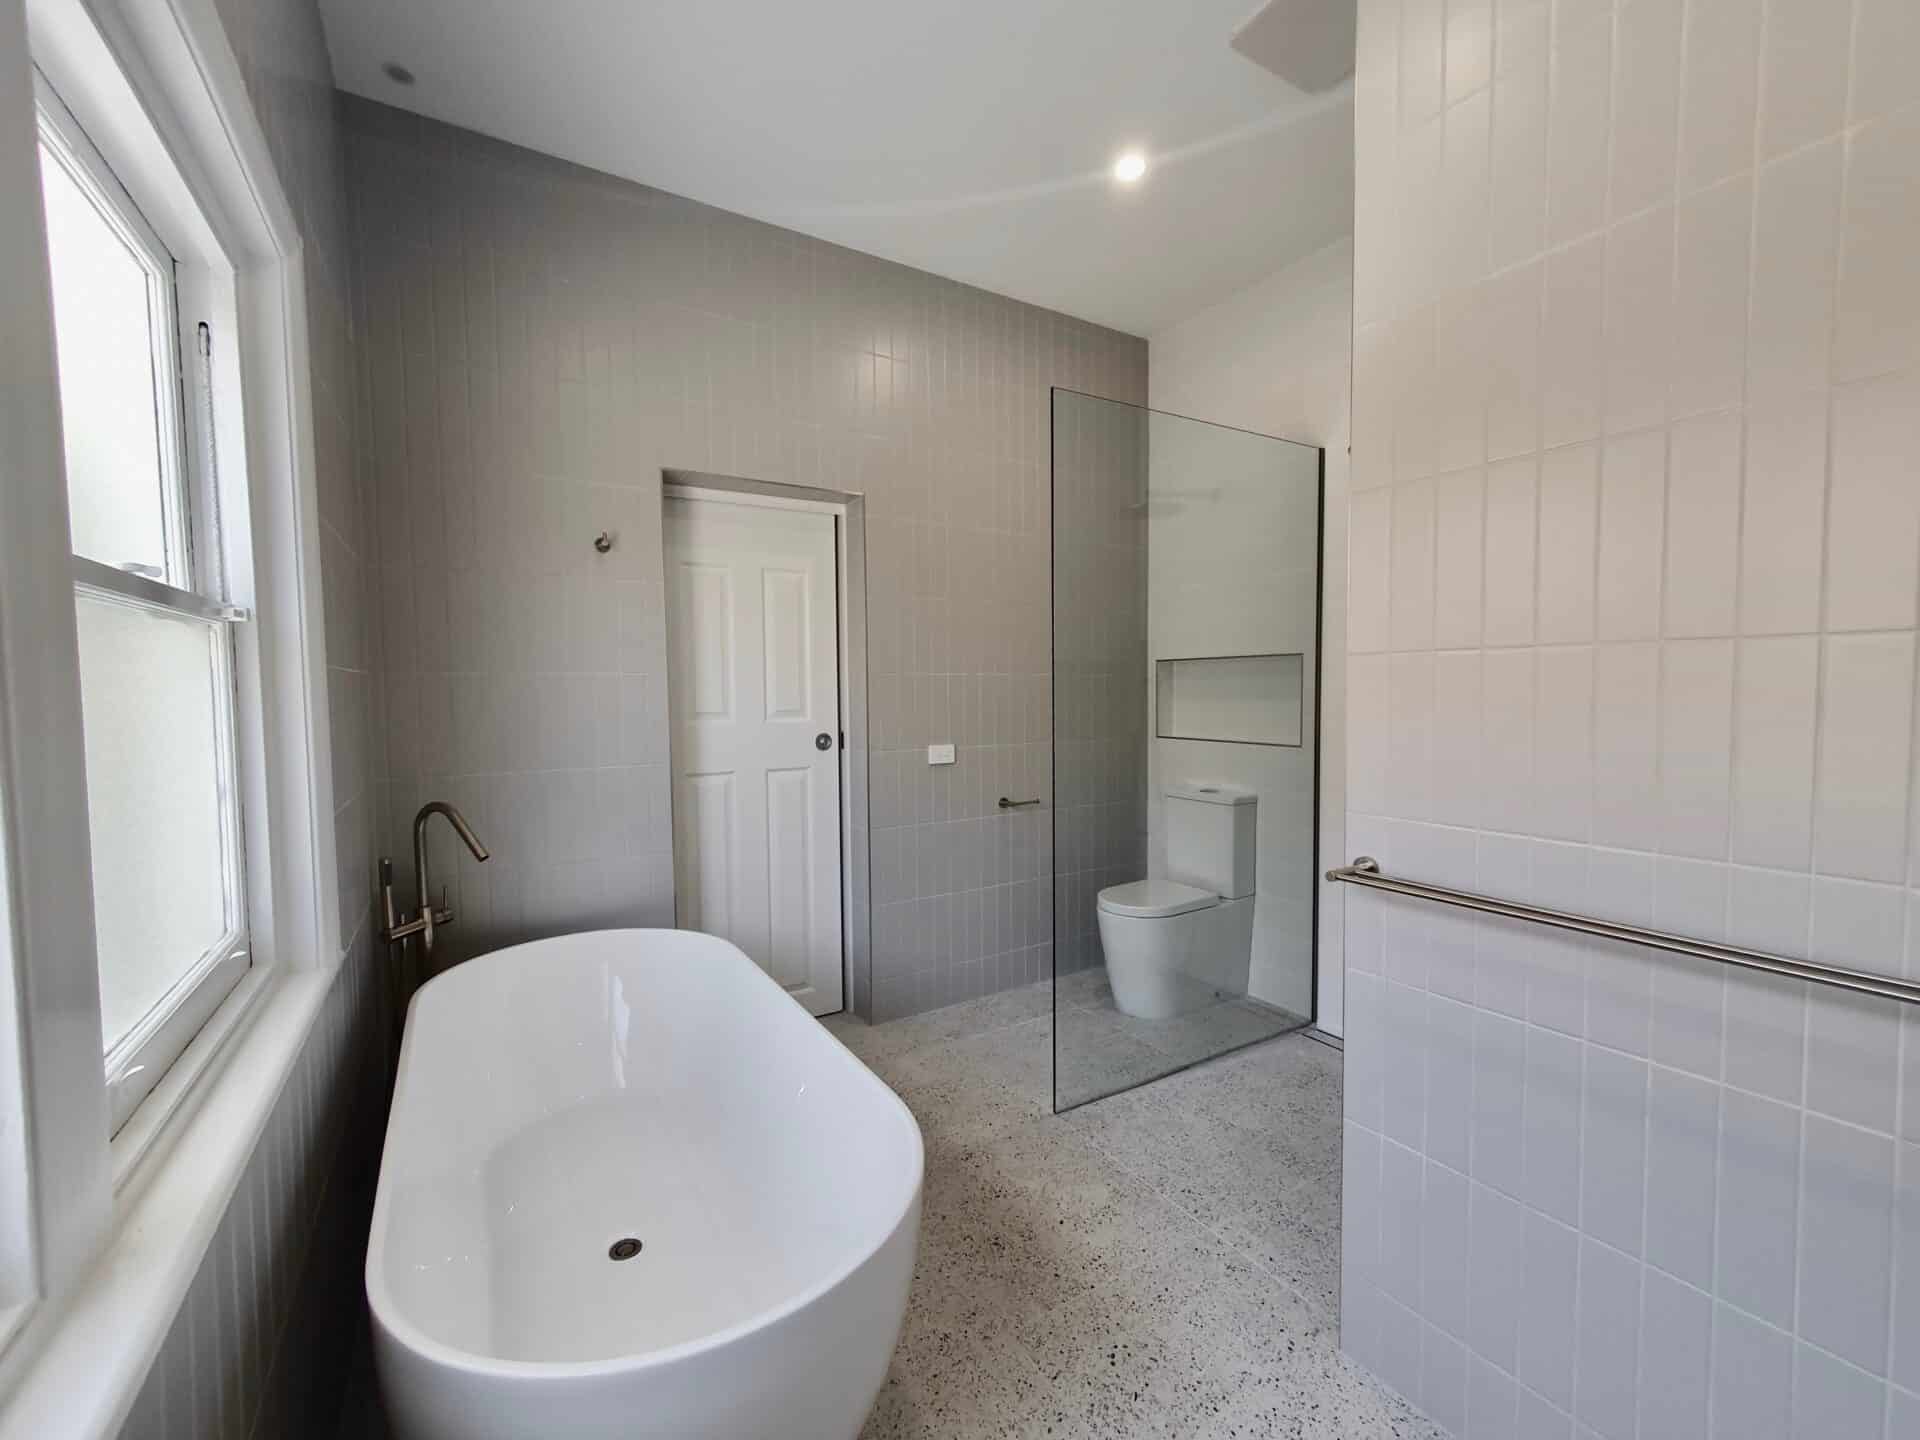 gray tiled bathroom with a bath tub, toilet and a shower glass